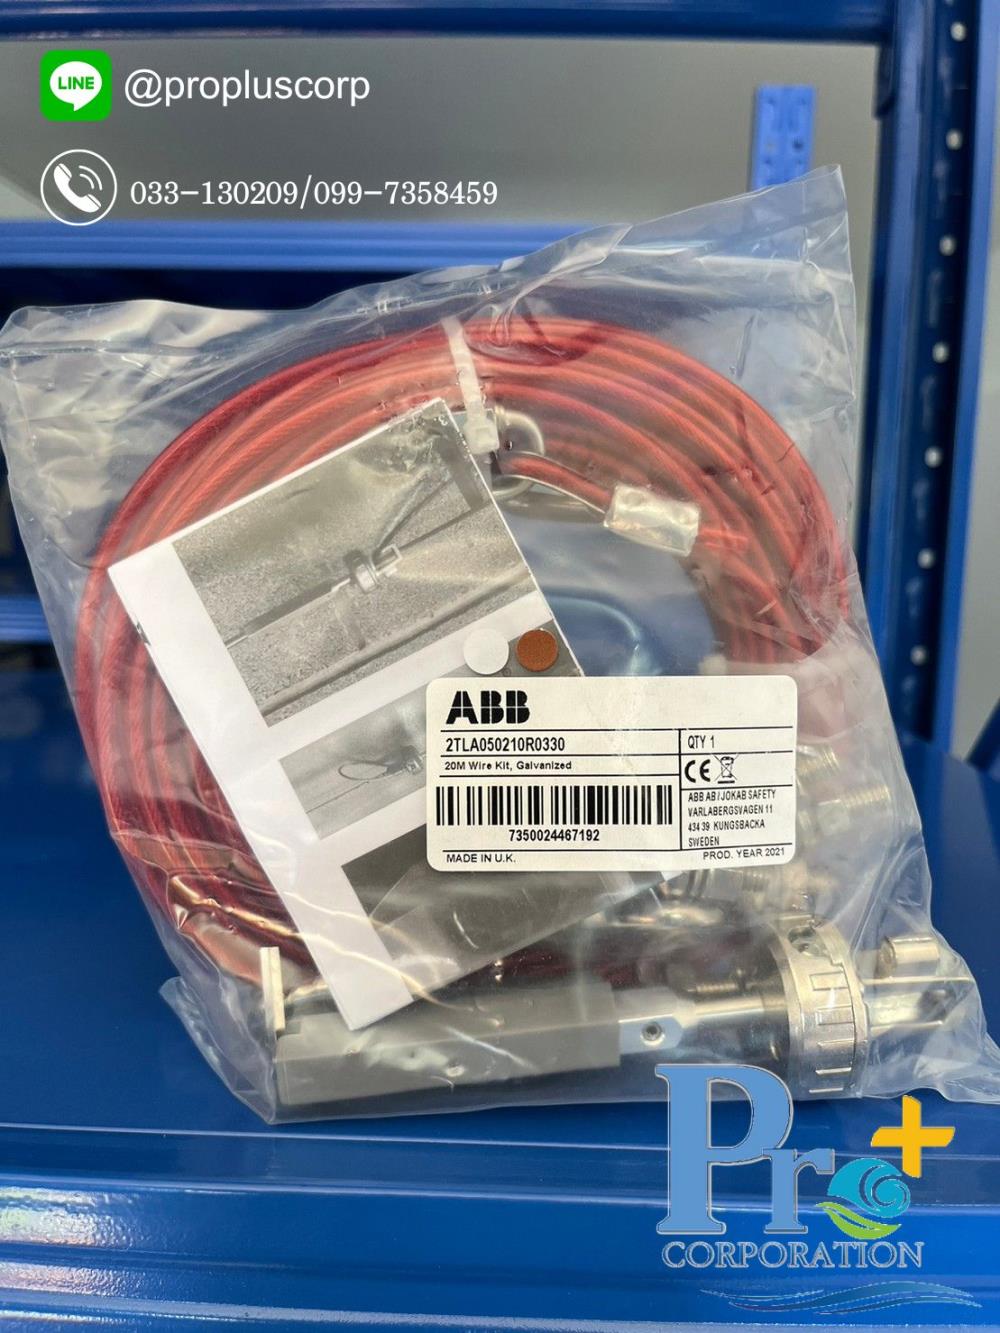 Safety Wire Switche Emergency Stop 2TLA050210R0330 20m Wire kit Galv,2TLA050210R0330,ABB,Electrical and Power Generation/Safety Equipment